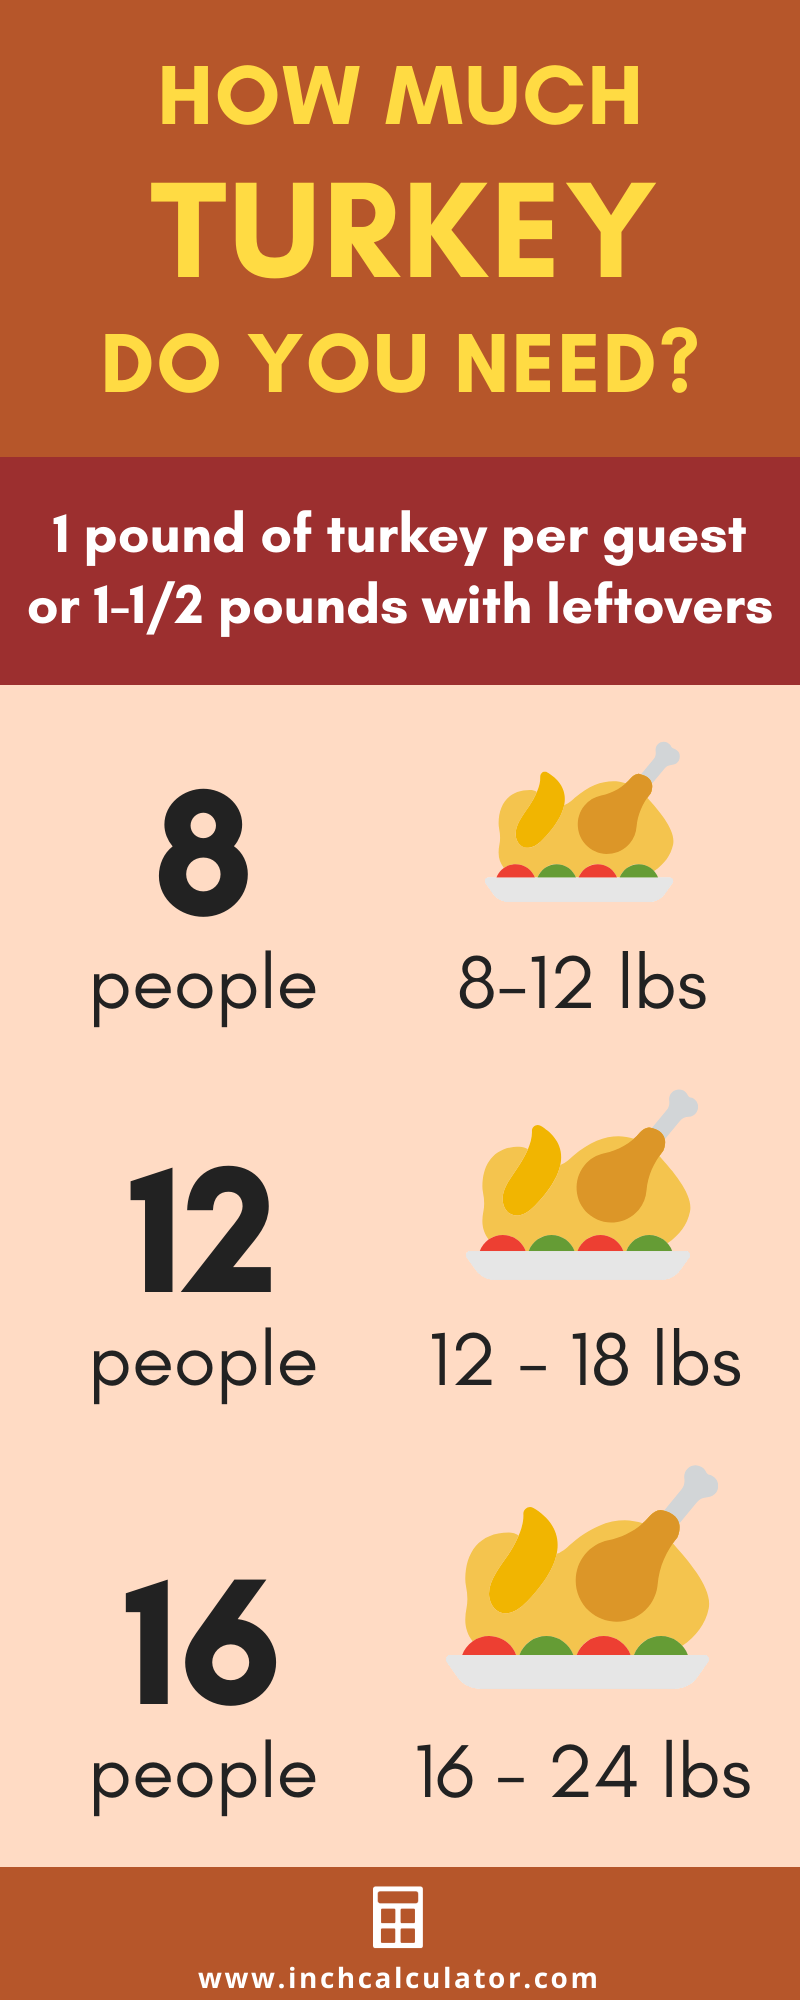 How big of a turkey do I need for 12 people?